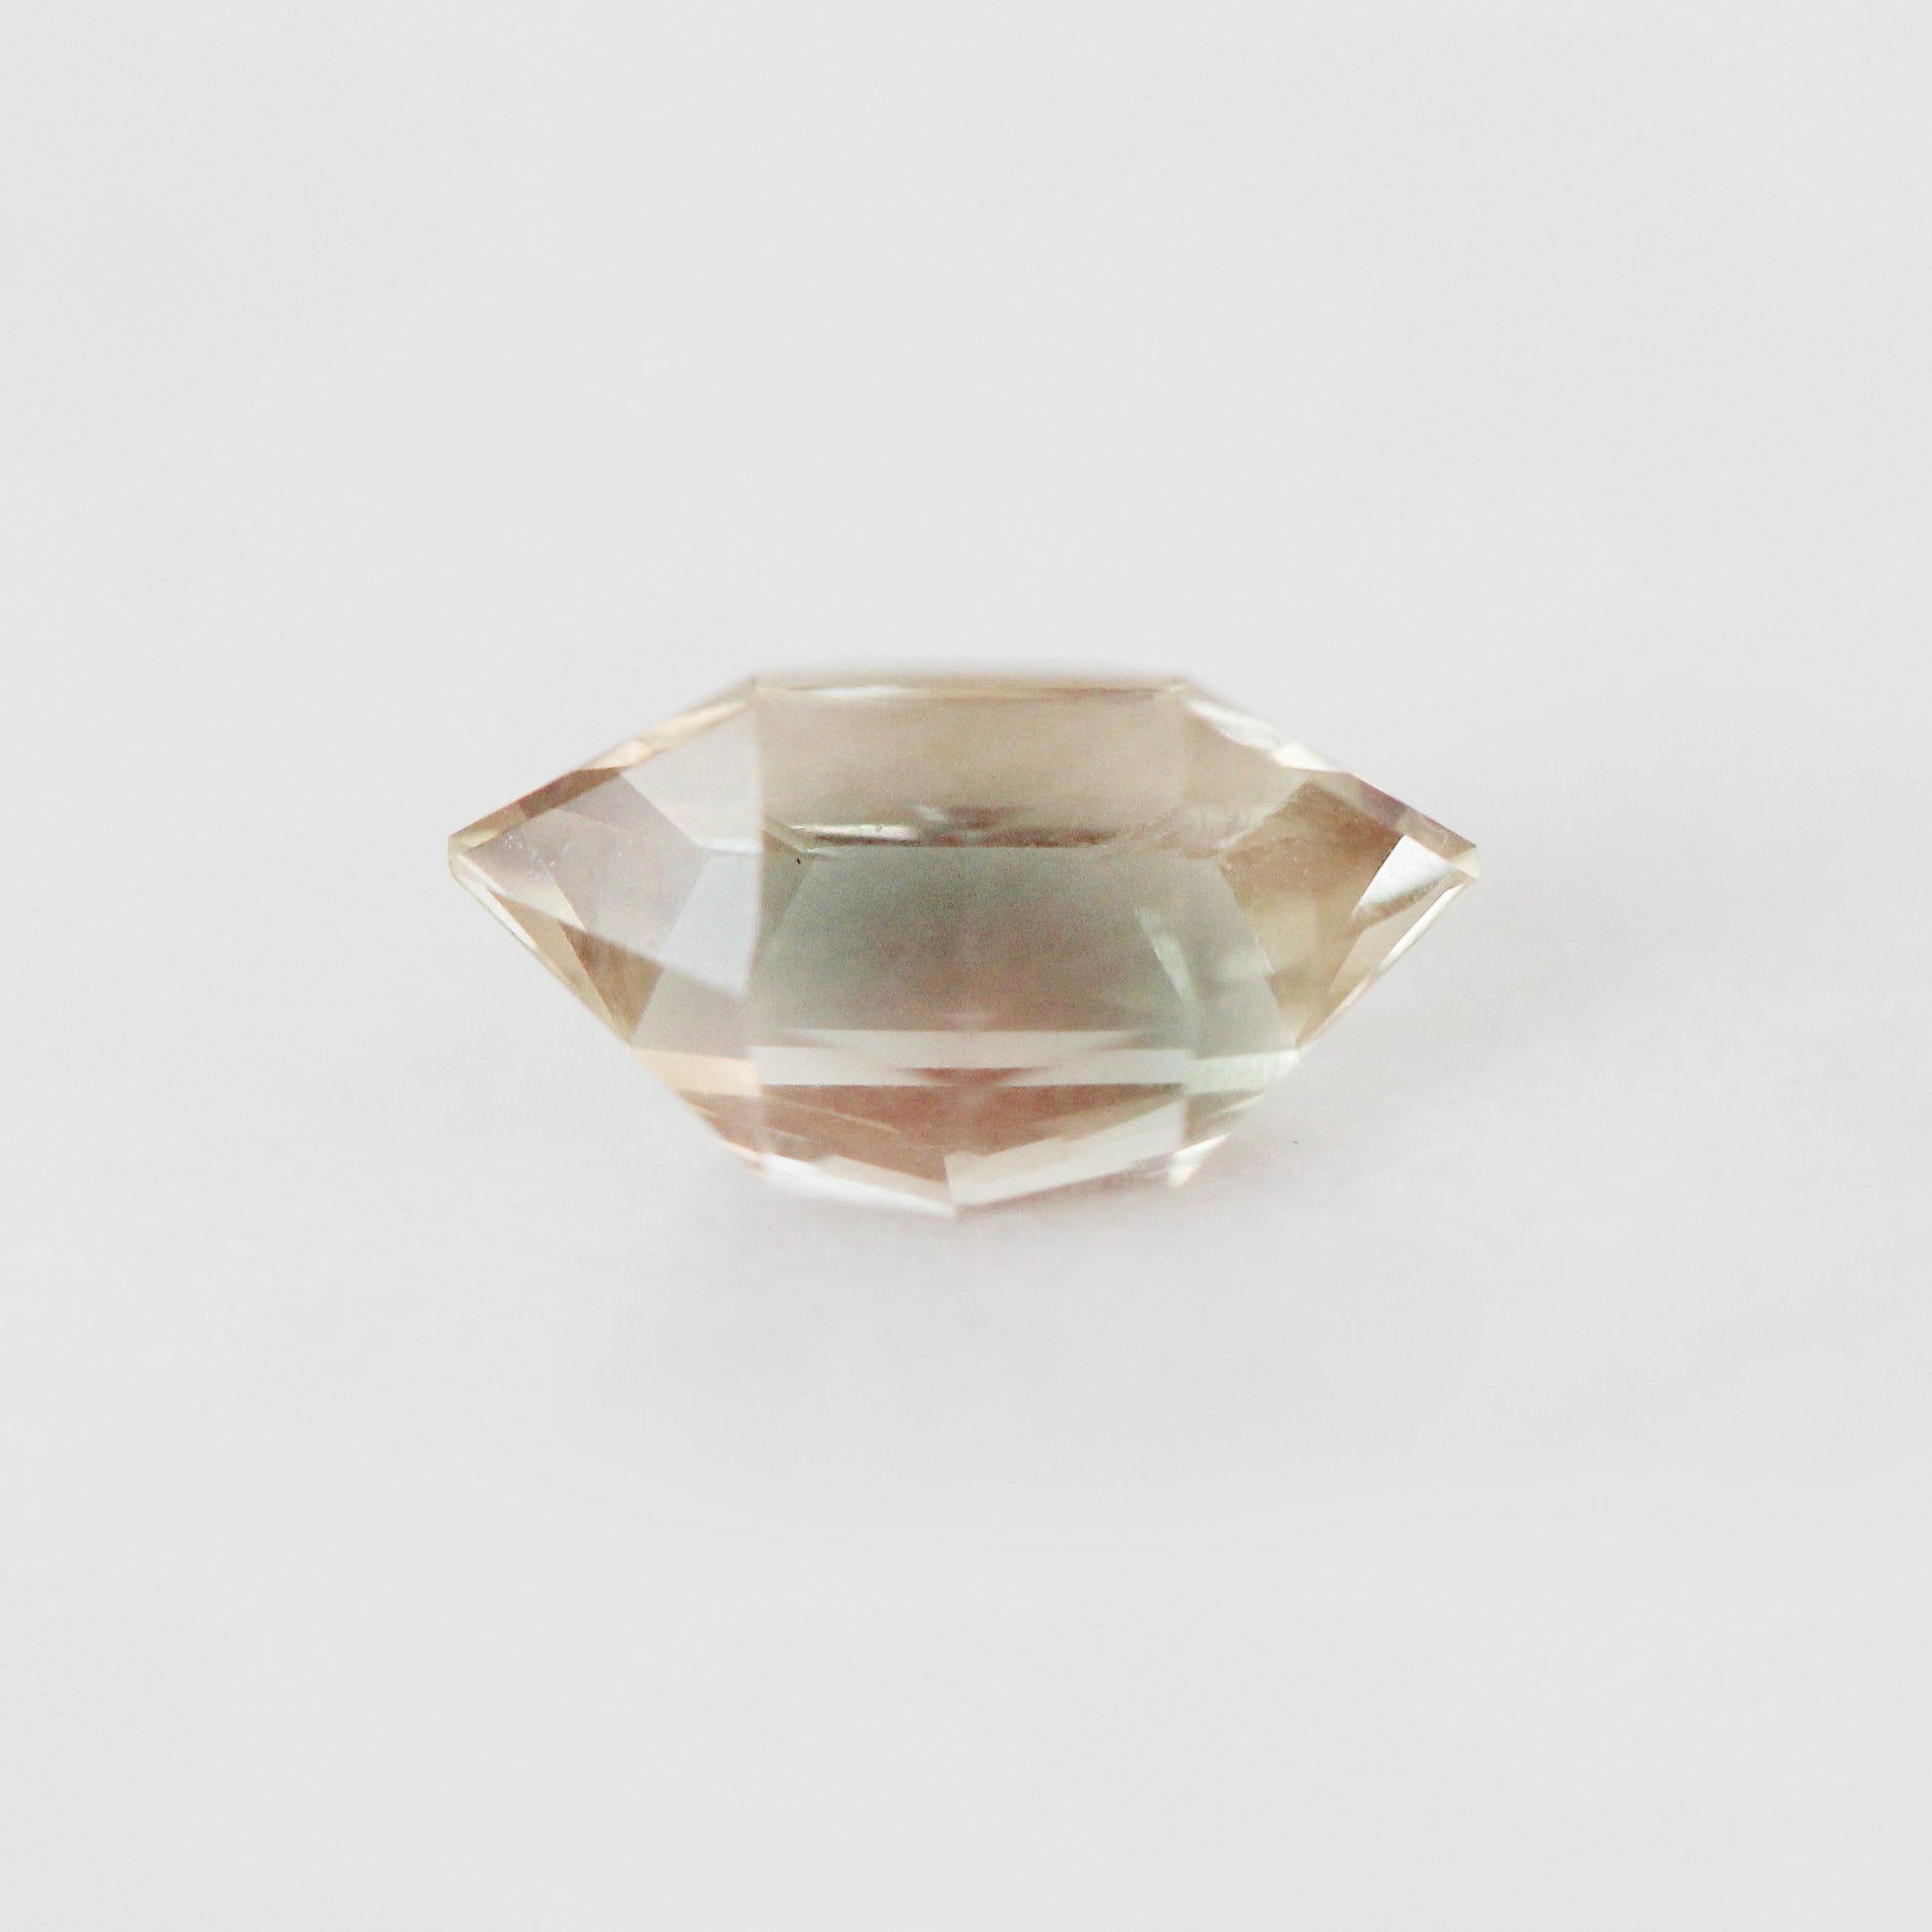 2.52ct Oregon Sunstone for Custom Work - Inventory Code SUN252 - Midwinter Co. Alternative Bridal Rings and Modern Fine Jewelry